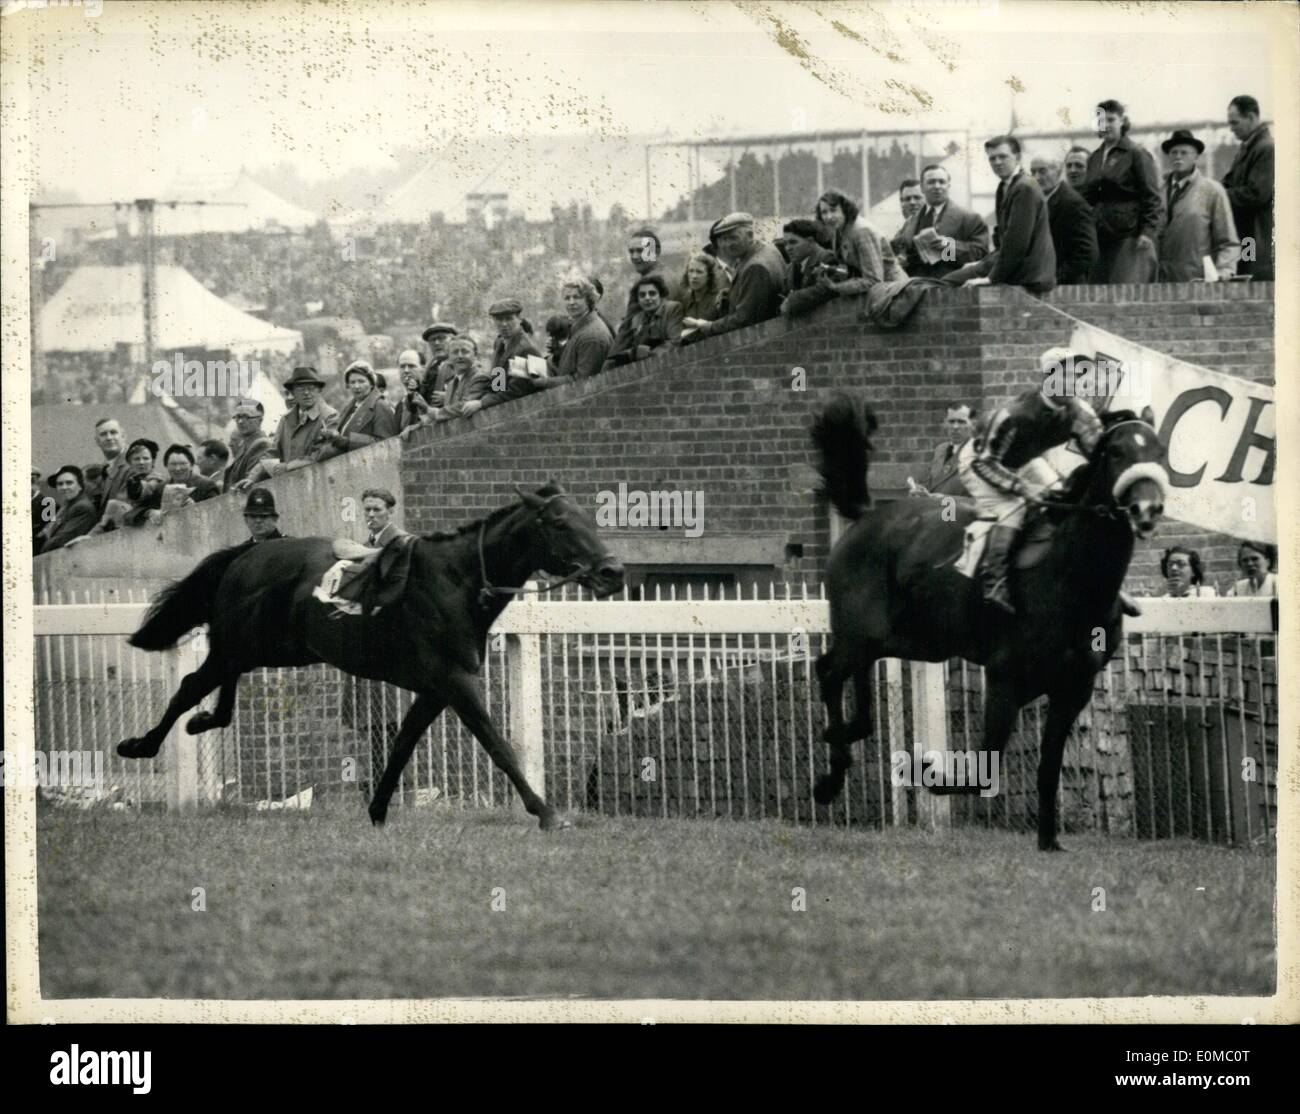 Jun. 06, 1954 - Racing at Epsom Charlie Smirke Unseated: Jockey C. Smirke was unseated from his mount ''Bois Le Roi'', at the Bunbury Stakes at Epsom today - and the horse finished the race riderless. The race was won by alligator11. Picture Shows: The finish of the Bunbury Stakes at Epsom today- Showing Alligator 11 (K.Gethin ) winning, followed by the riderless ''Bois Le Roi' Stock Photo